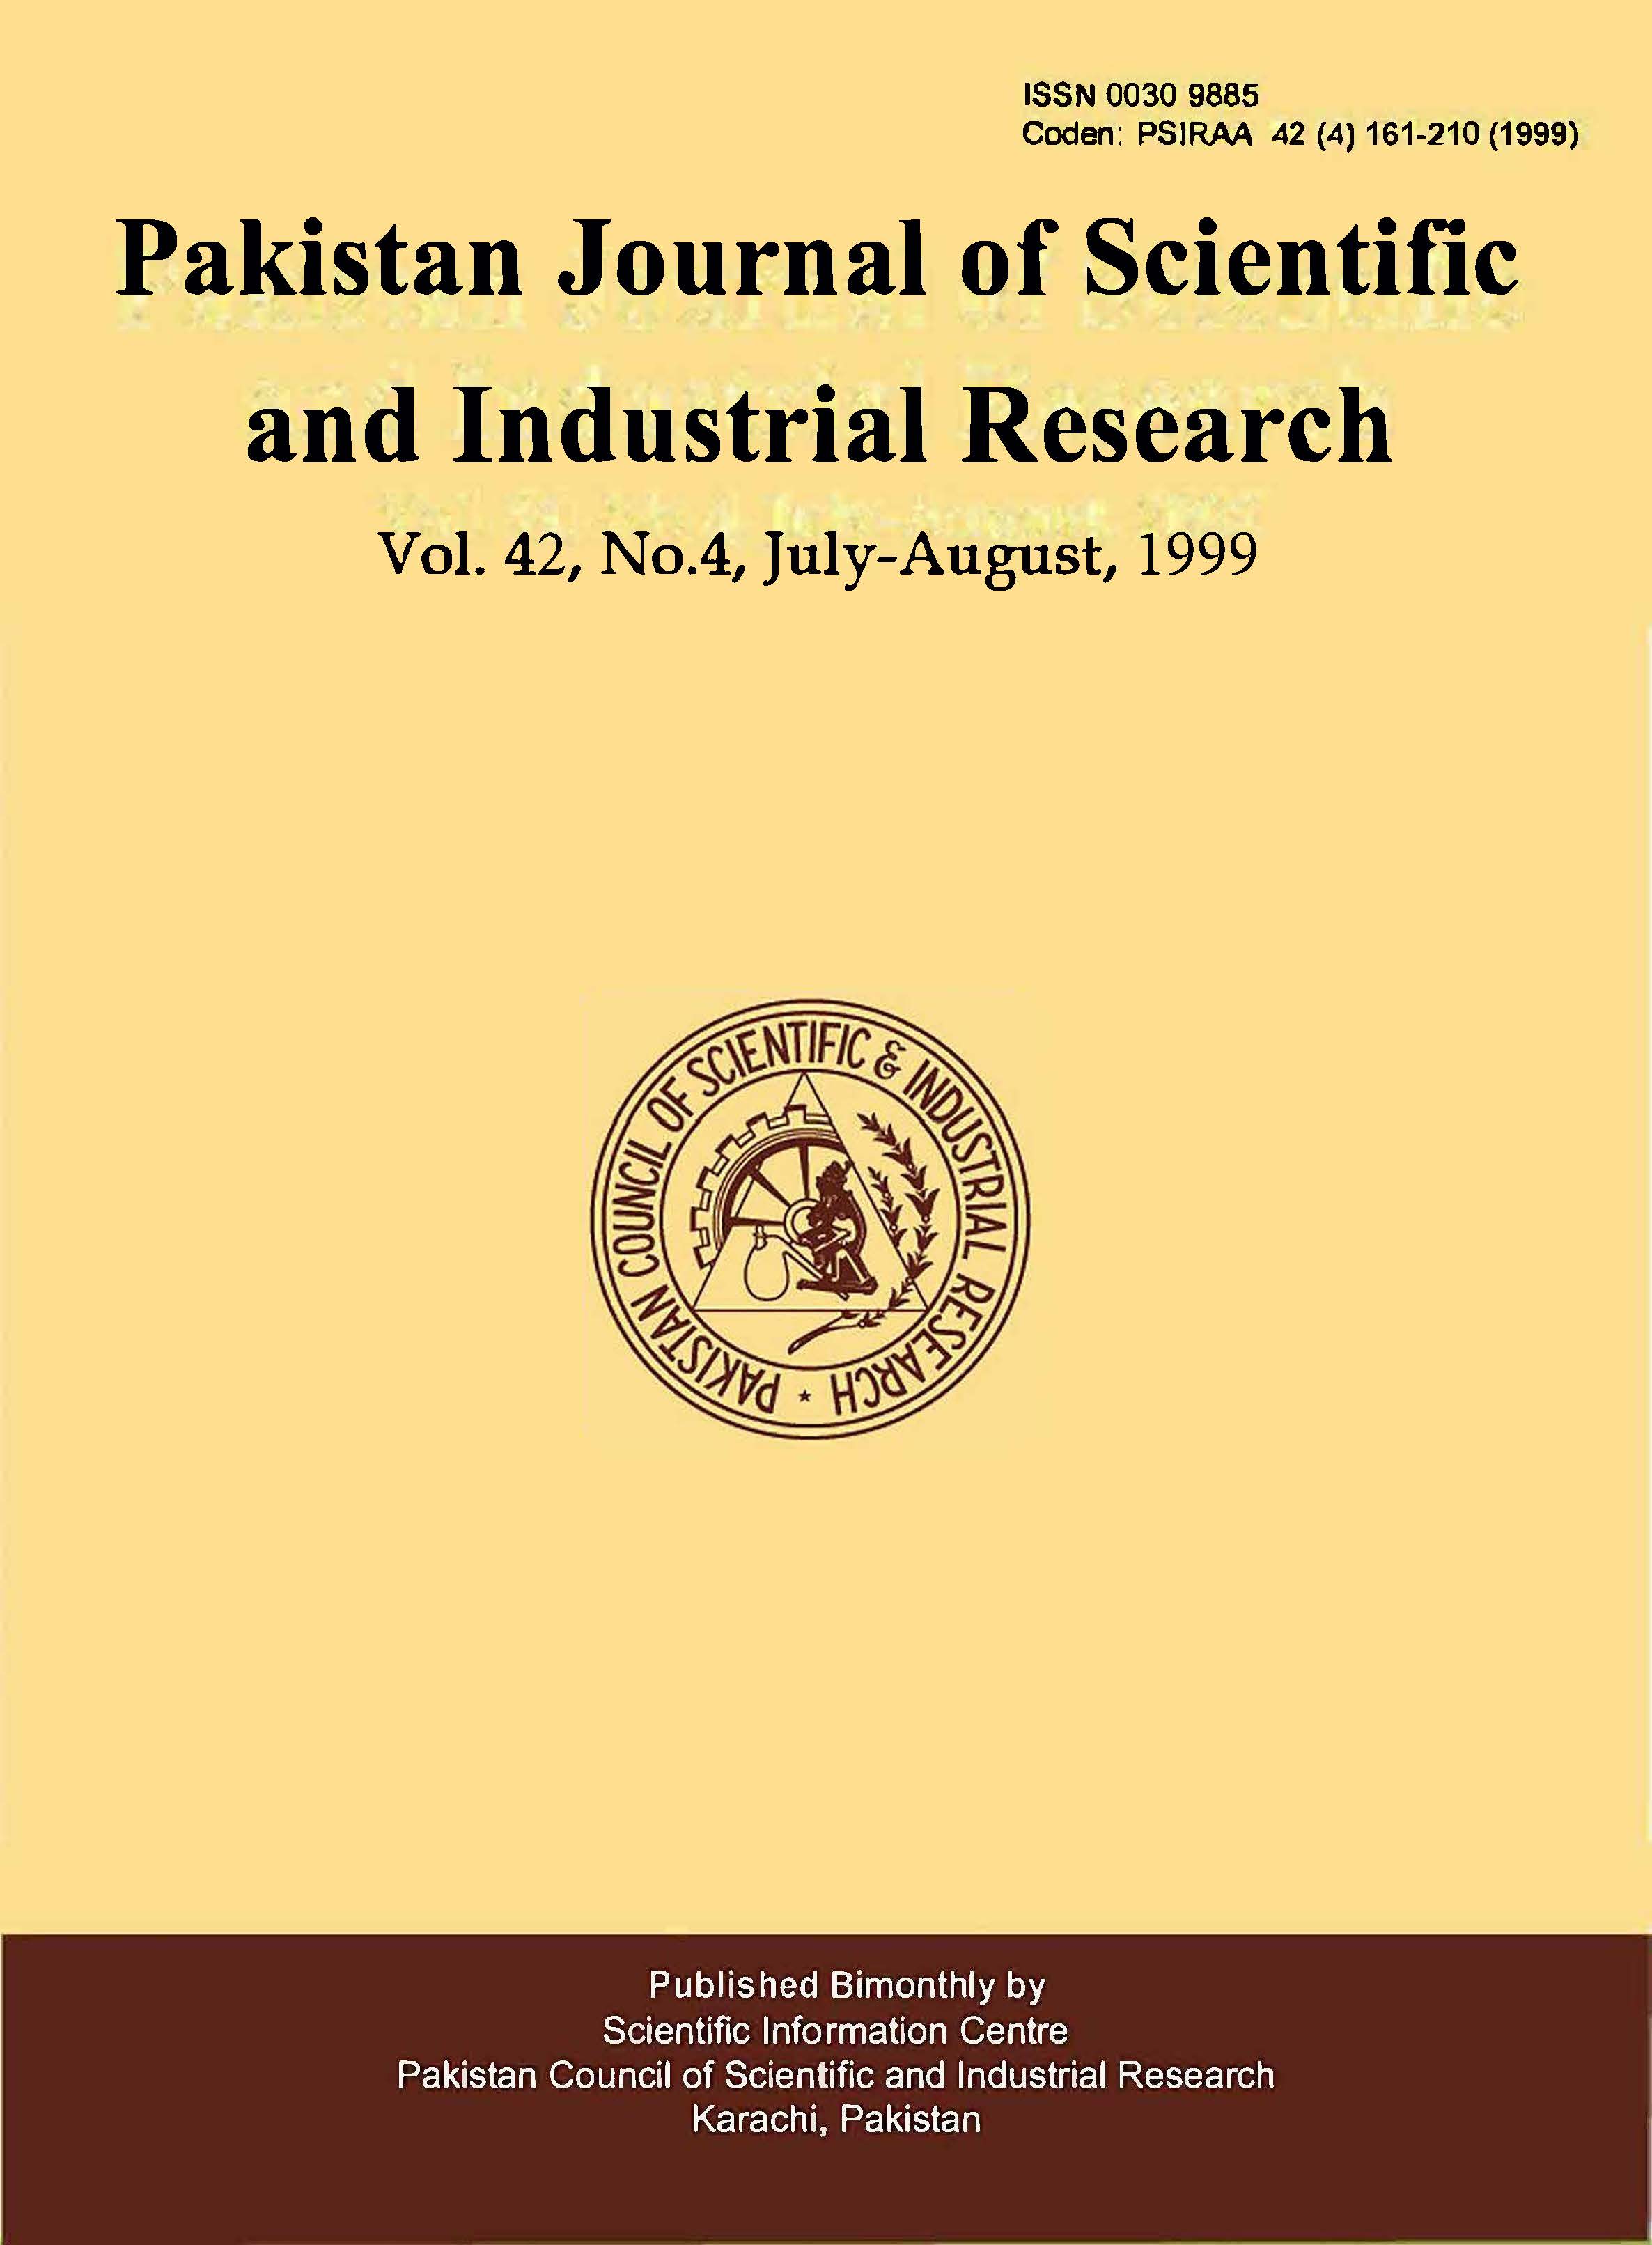 					View Vol. 42 No. 4 (1999): Pakistan Journal of Scientific and Industrial Research
				